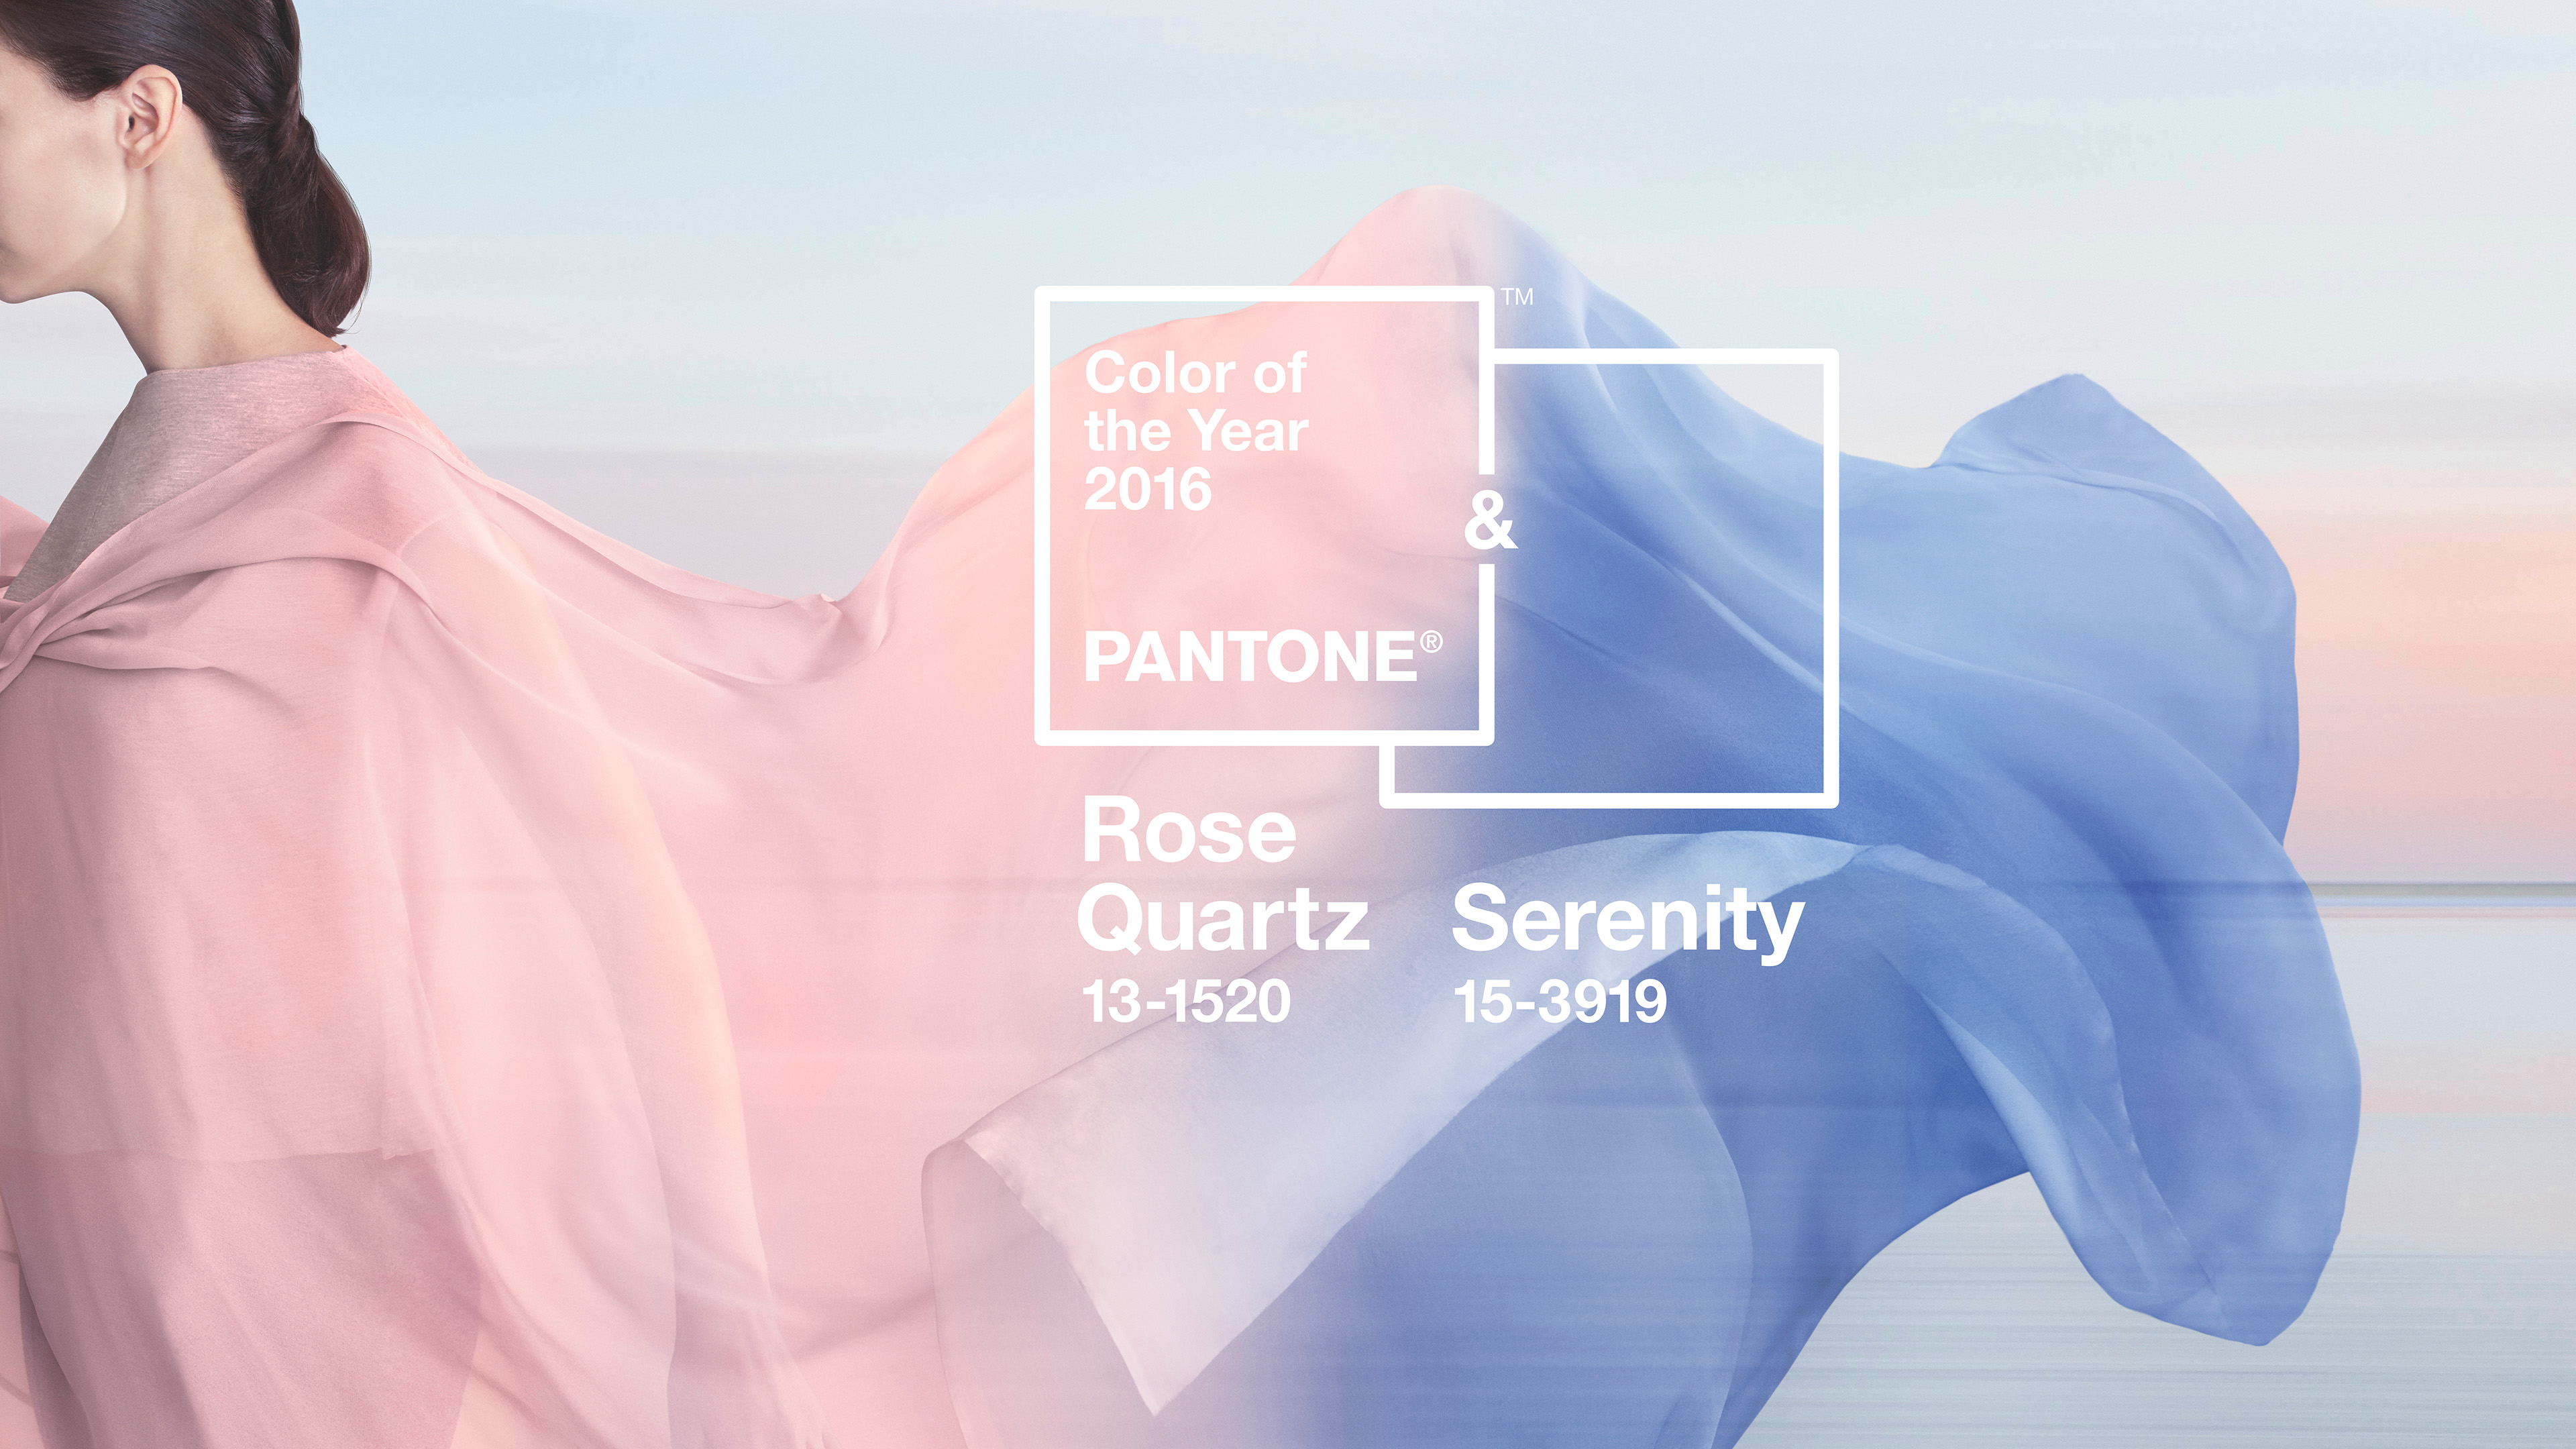 PANTONE-Color-of-the-Year-2016-v1-3840x2160